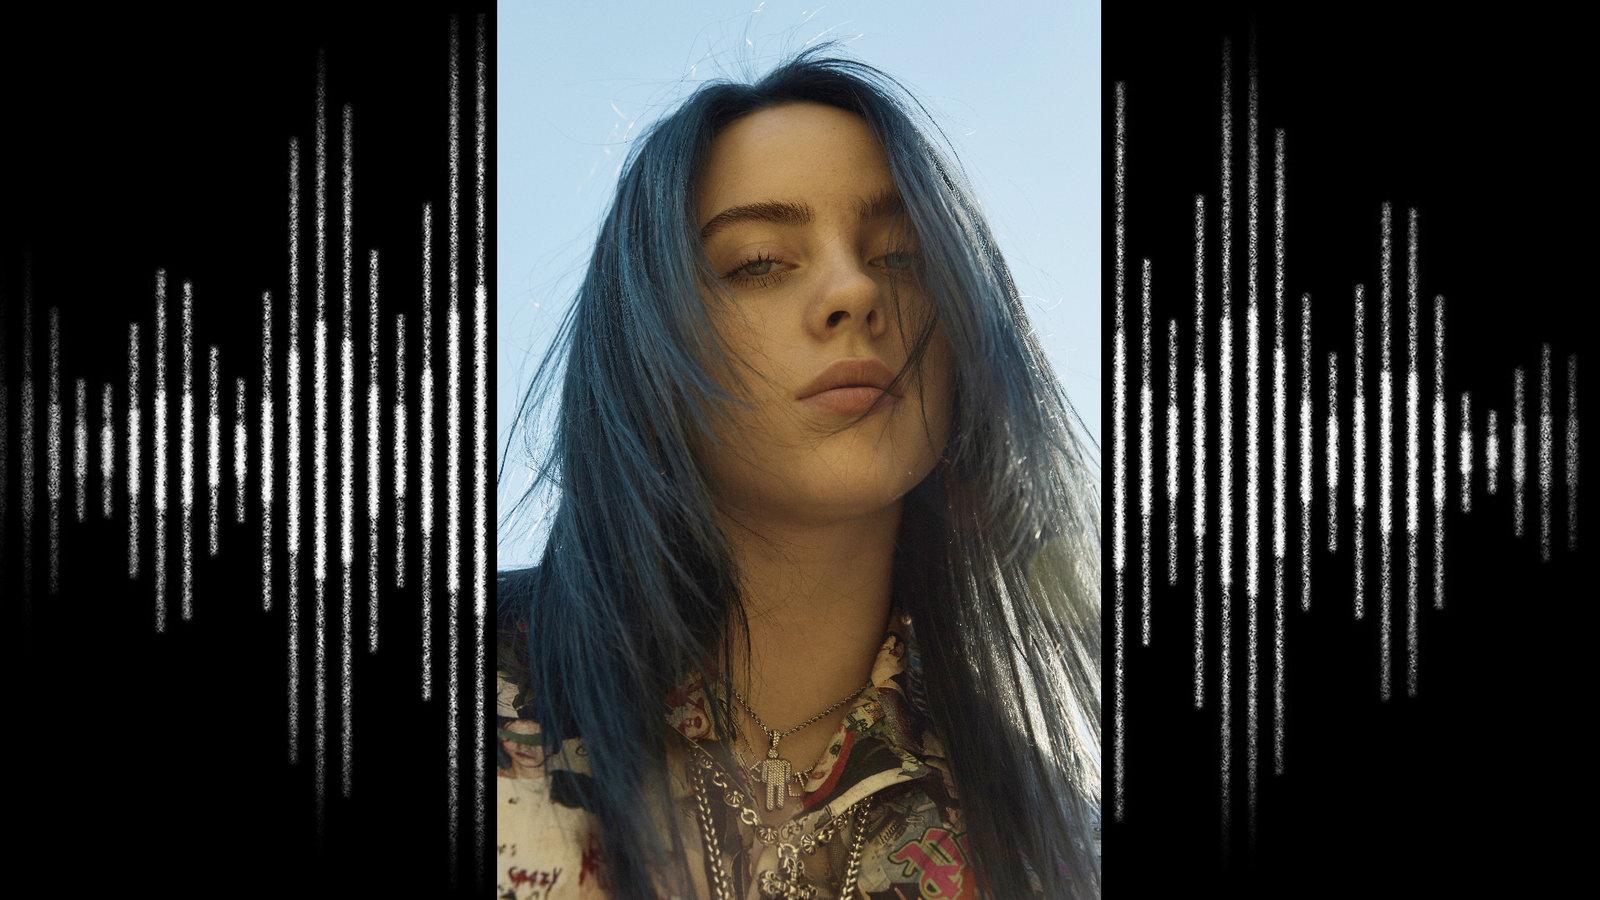 The Fastest Rising Pop Star Of The Moment Is 17 And Writes Off Kilter Hits With Her Older Brother From Their Parents’ House. Breaking Down Billie Eilish’s “Bury A Friend, ” We Show A New Model